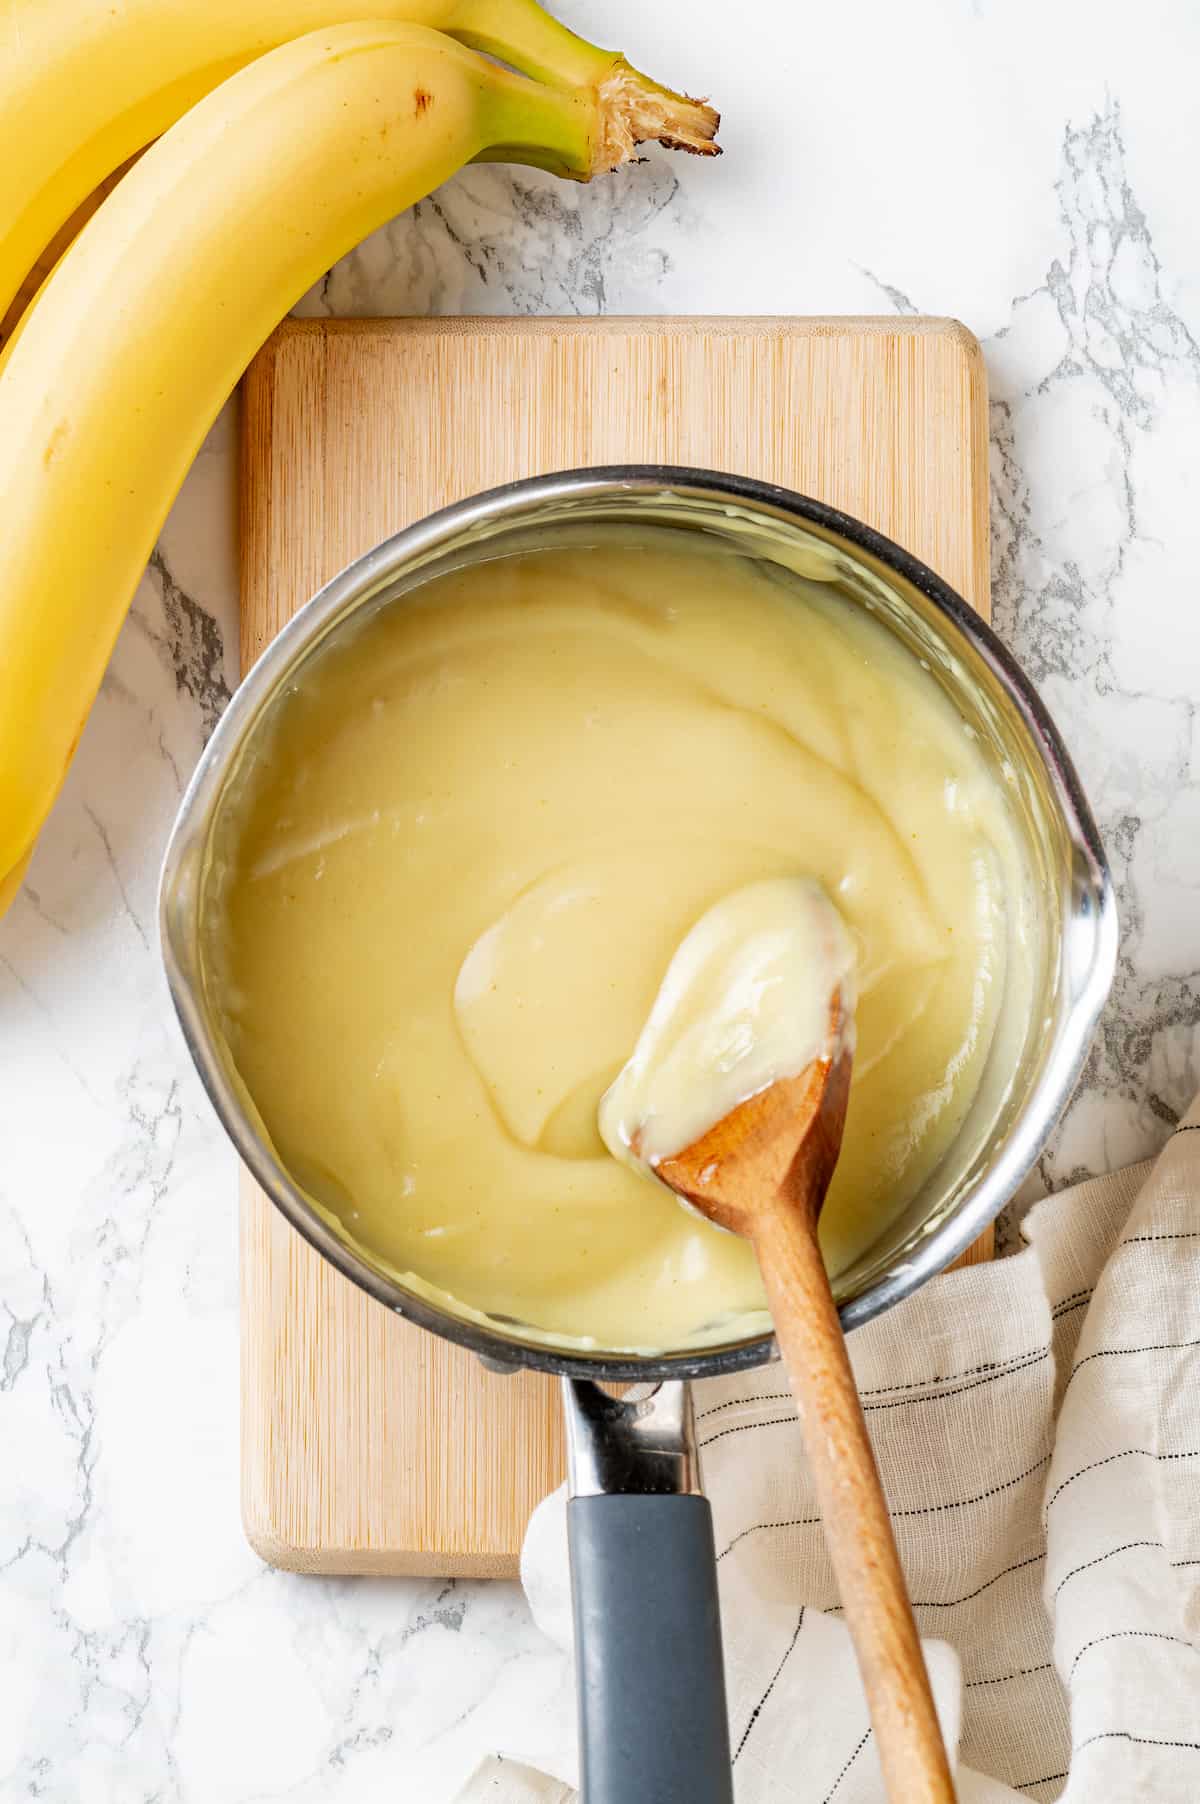 Overhead view of cream filling in saucepan with wooden spoon